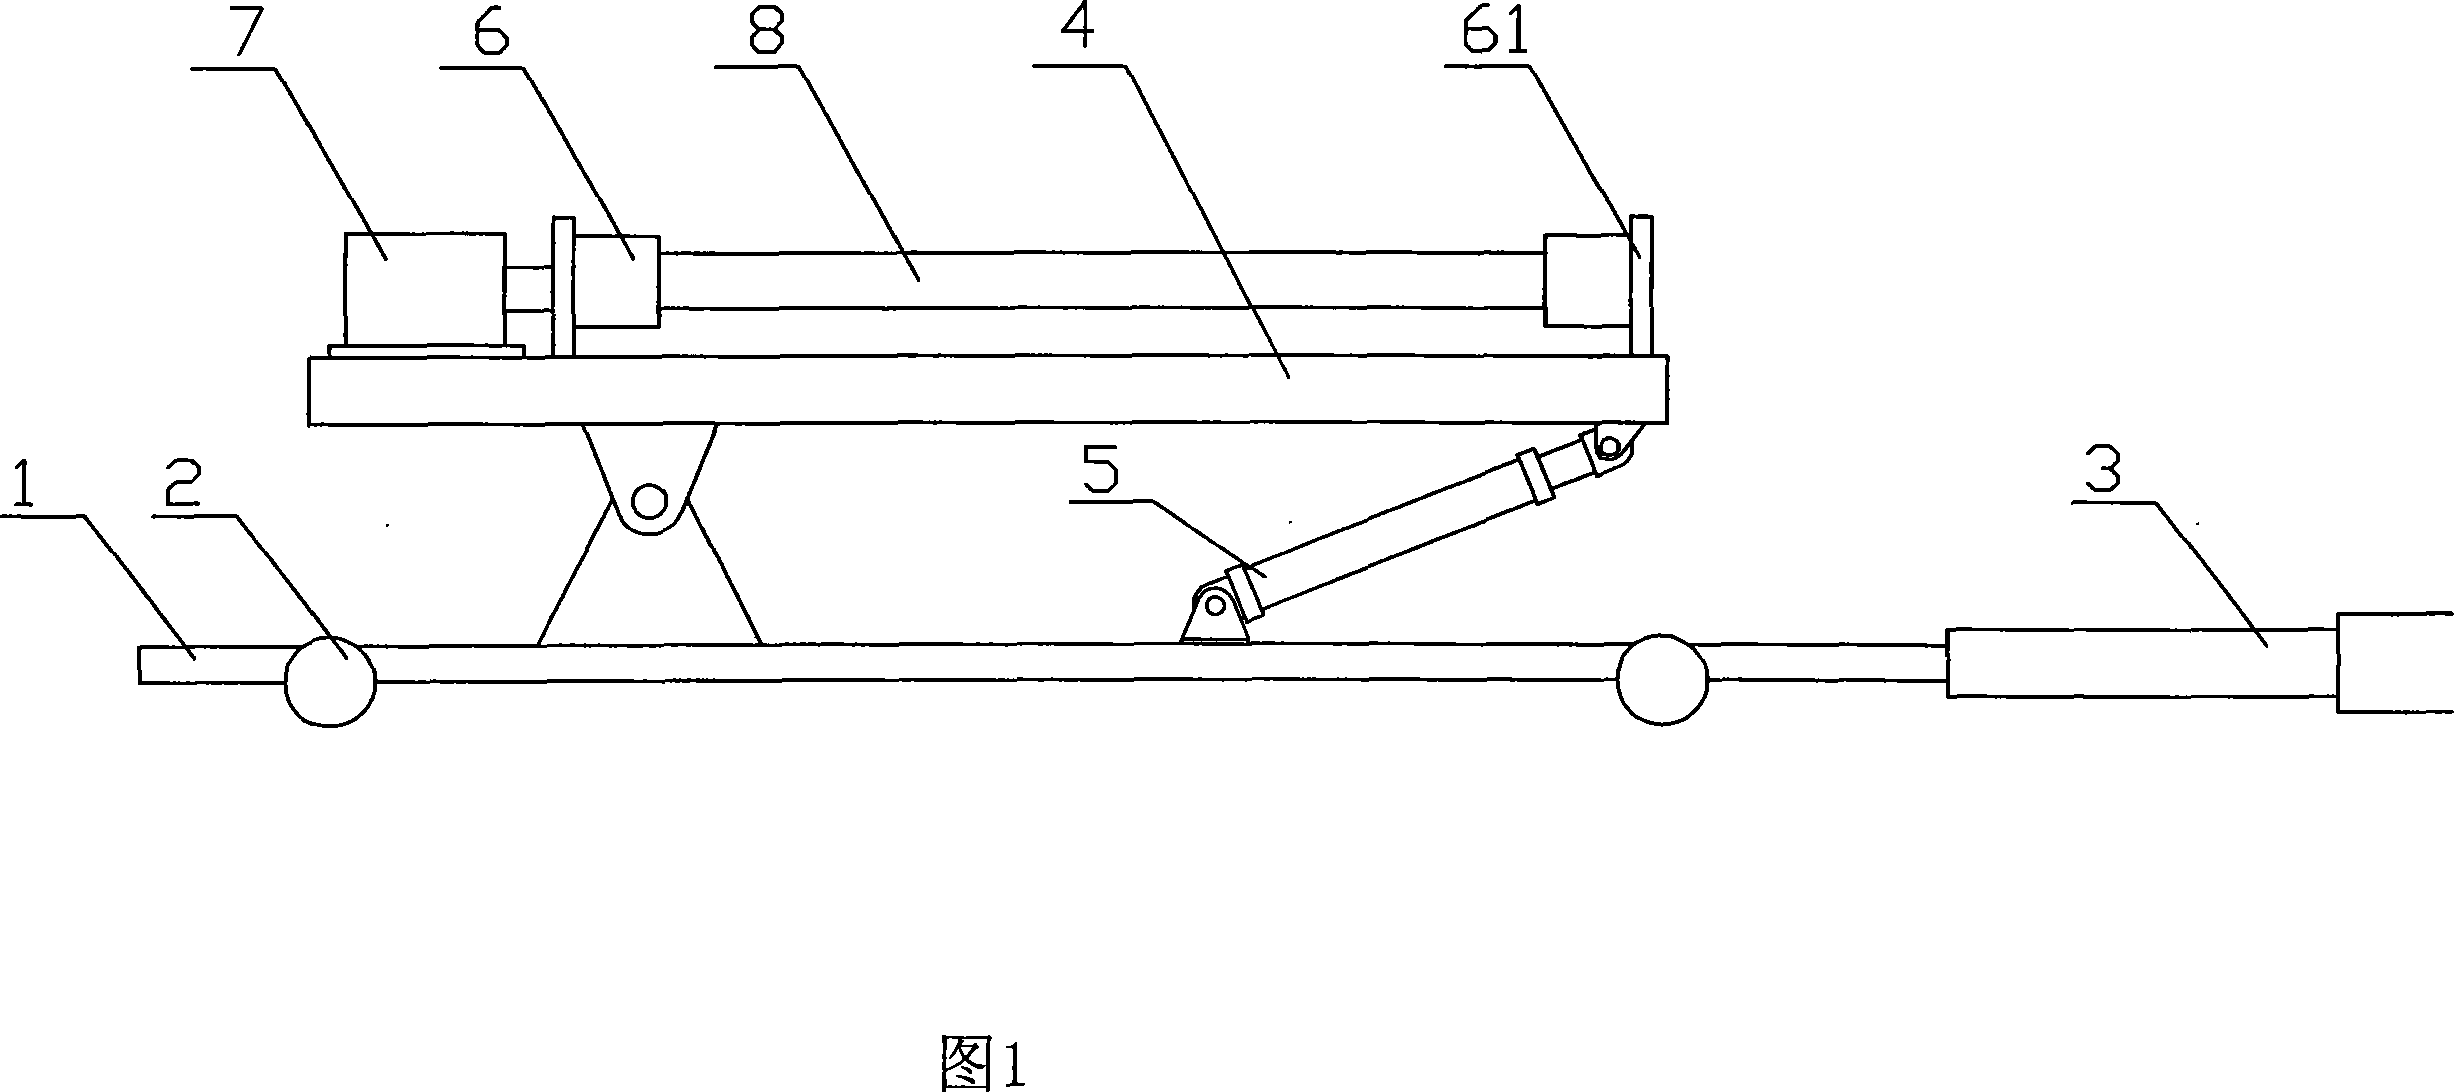 Process for making concrete pile and its special-purpose equipment